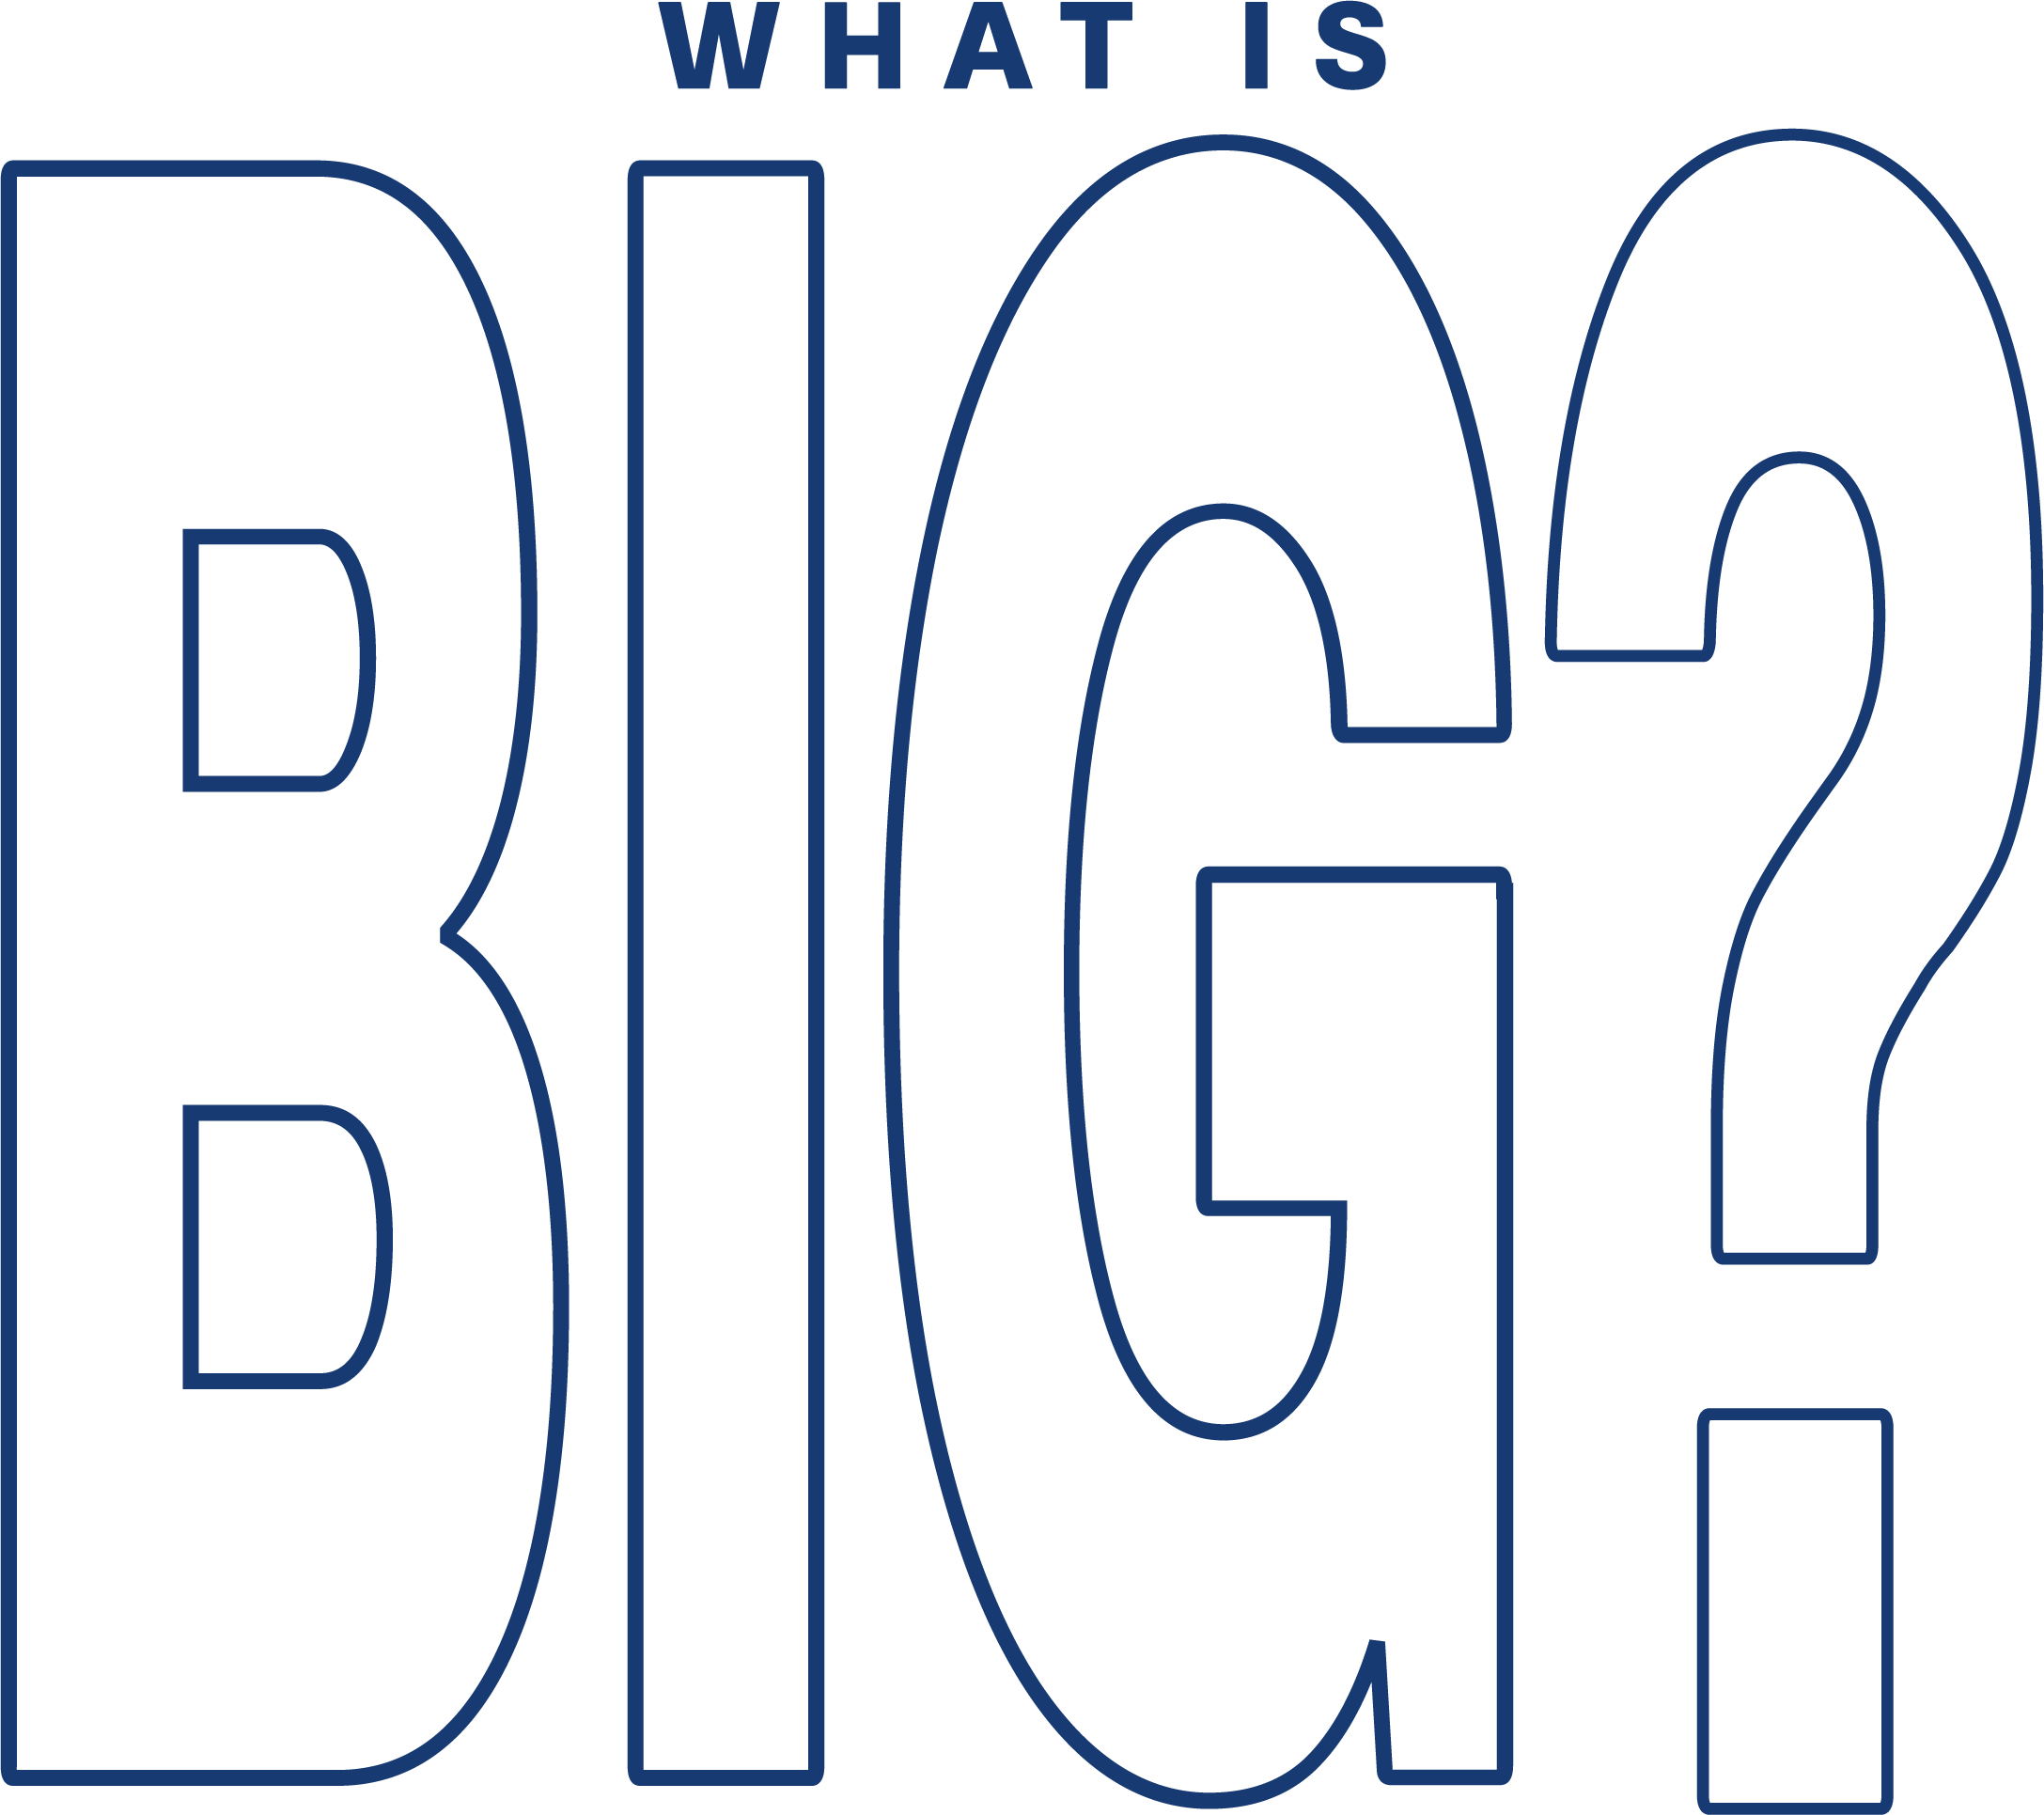 What is Big